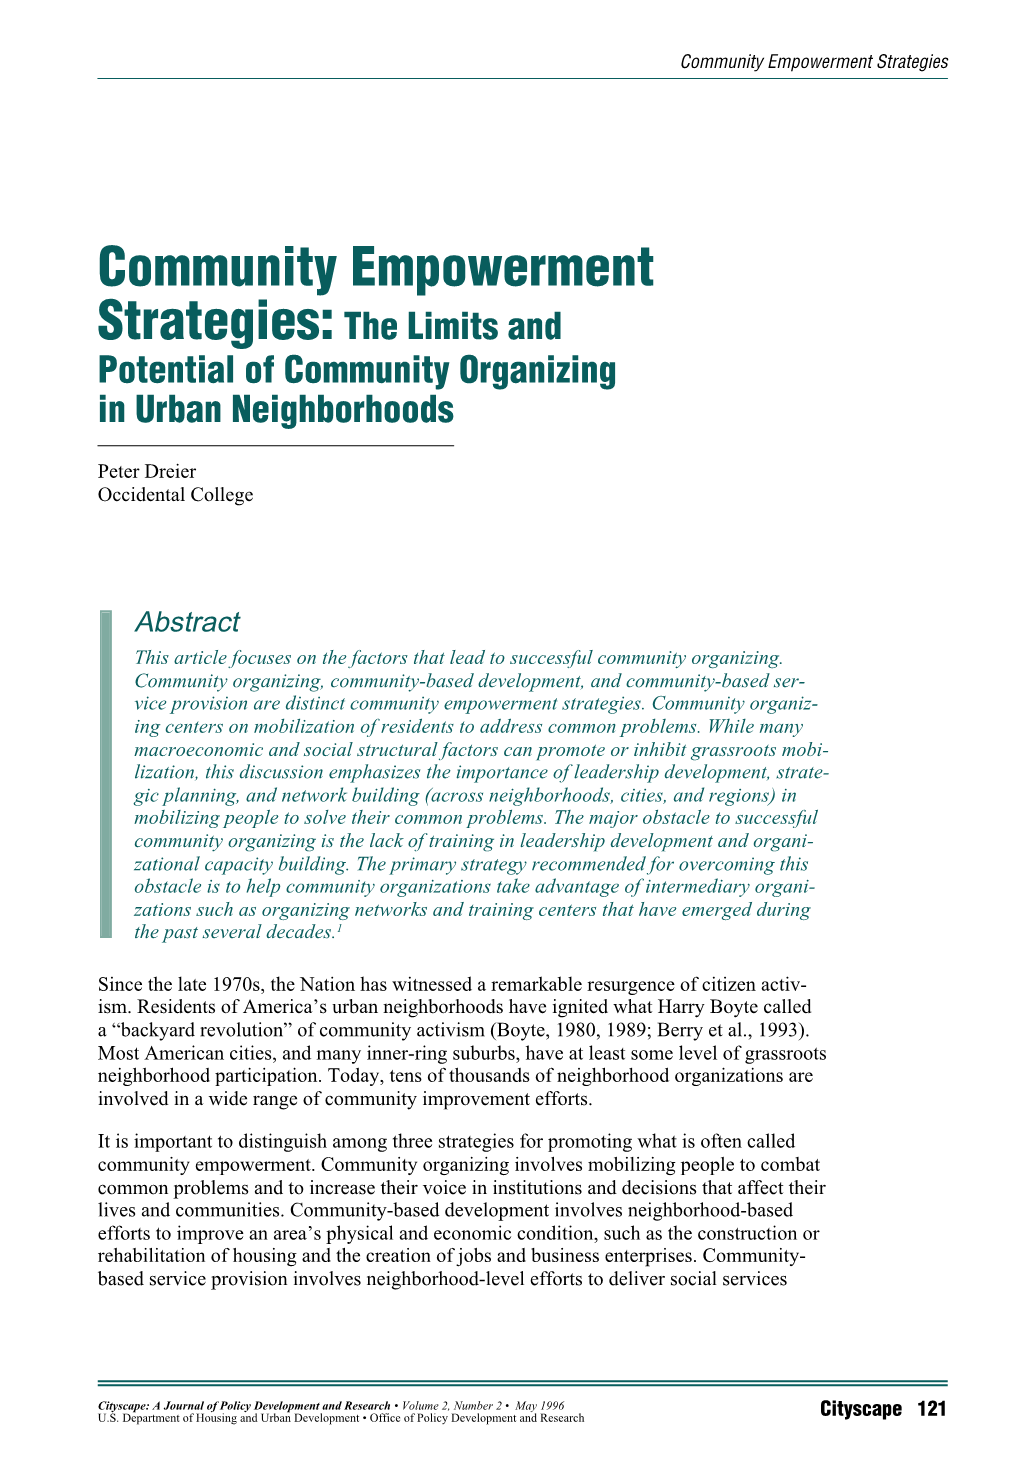 Community Empowerment Strategies: the Limits and Potential of Community Organizing in Urban Neighborhoods